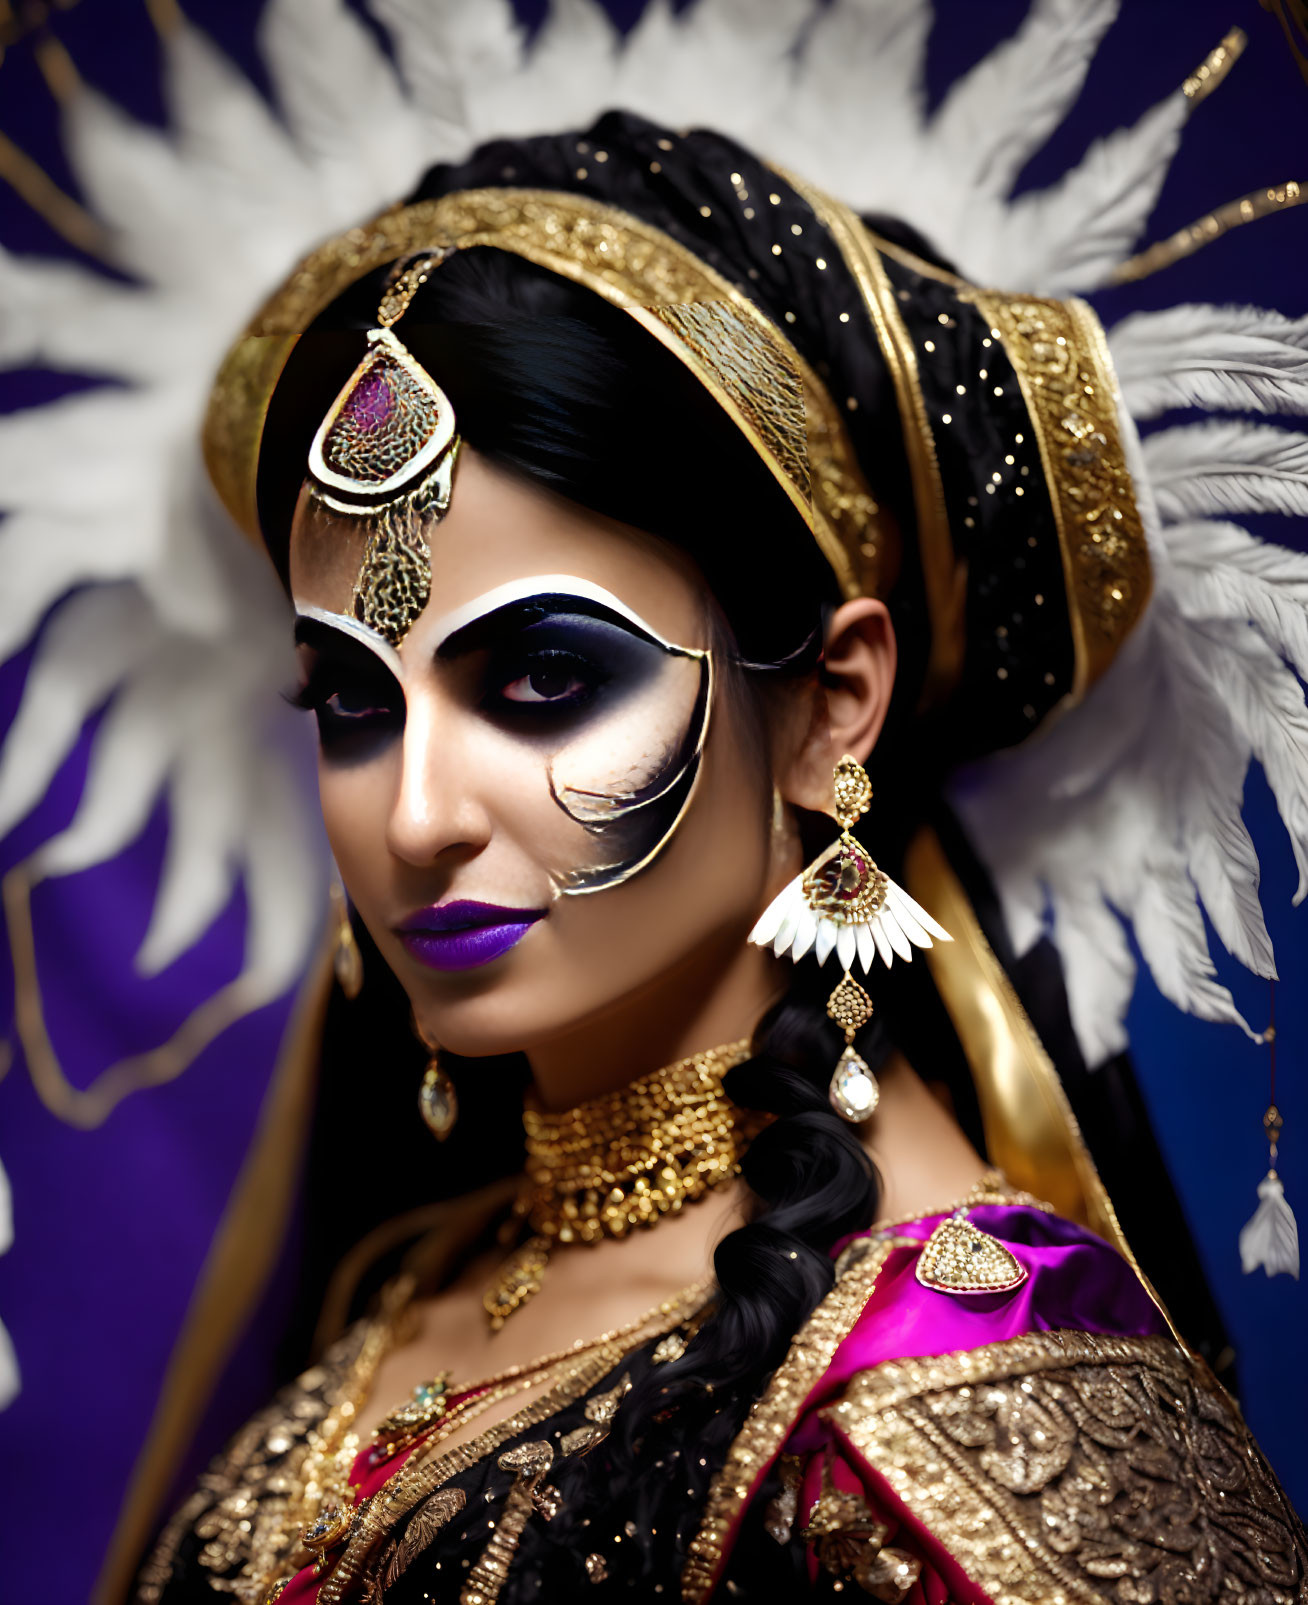 Woman in ornate headdress and dramatic makeup in traditional costume.